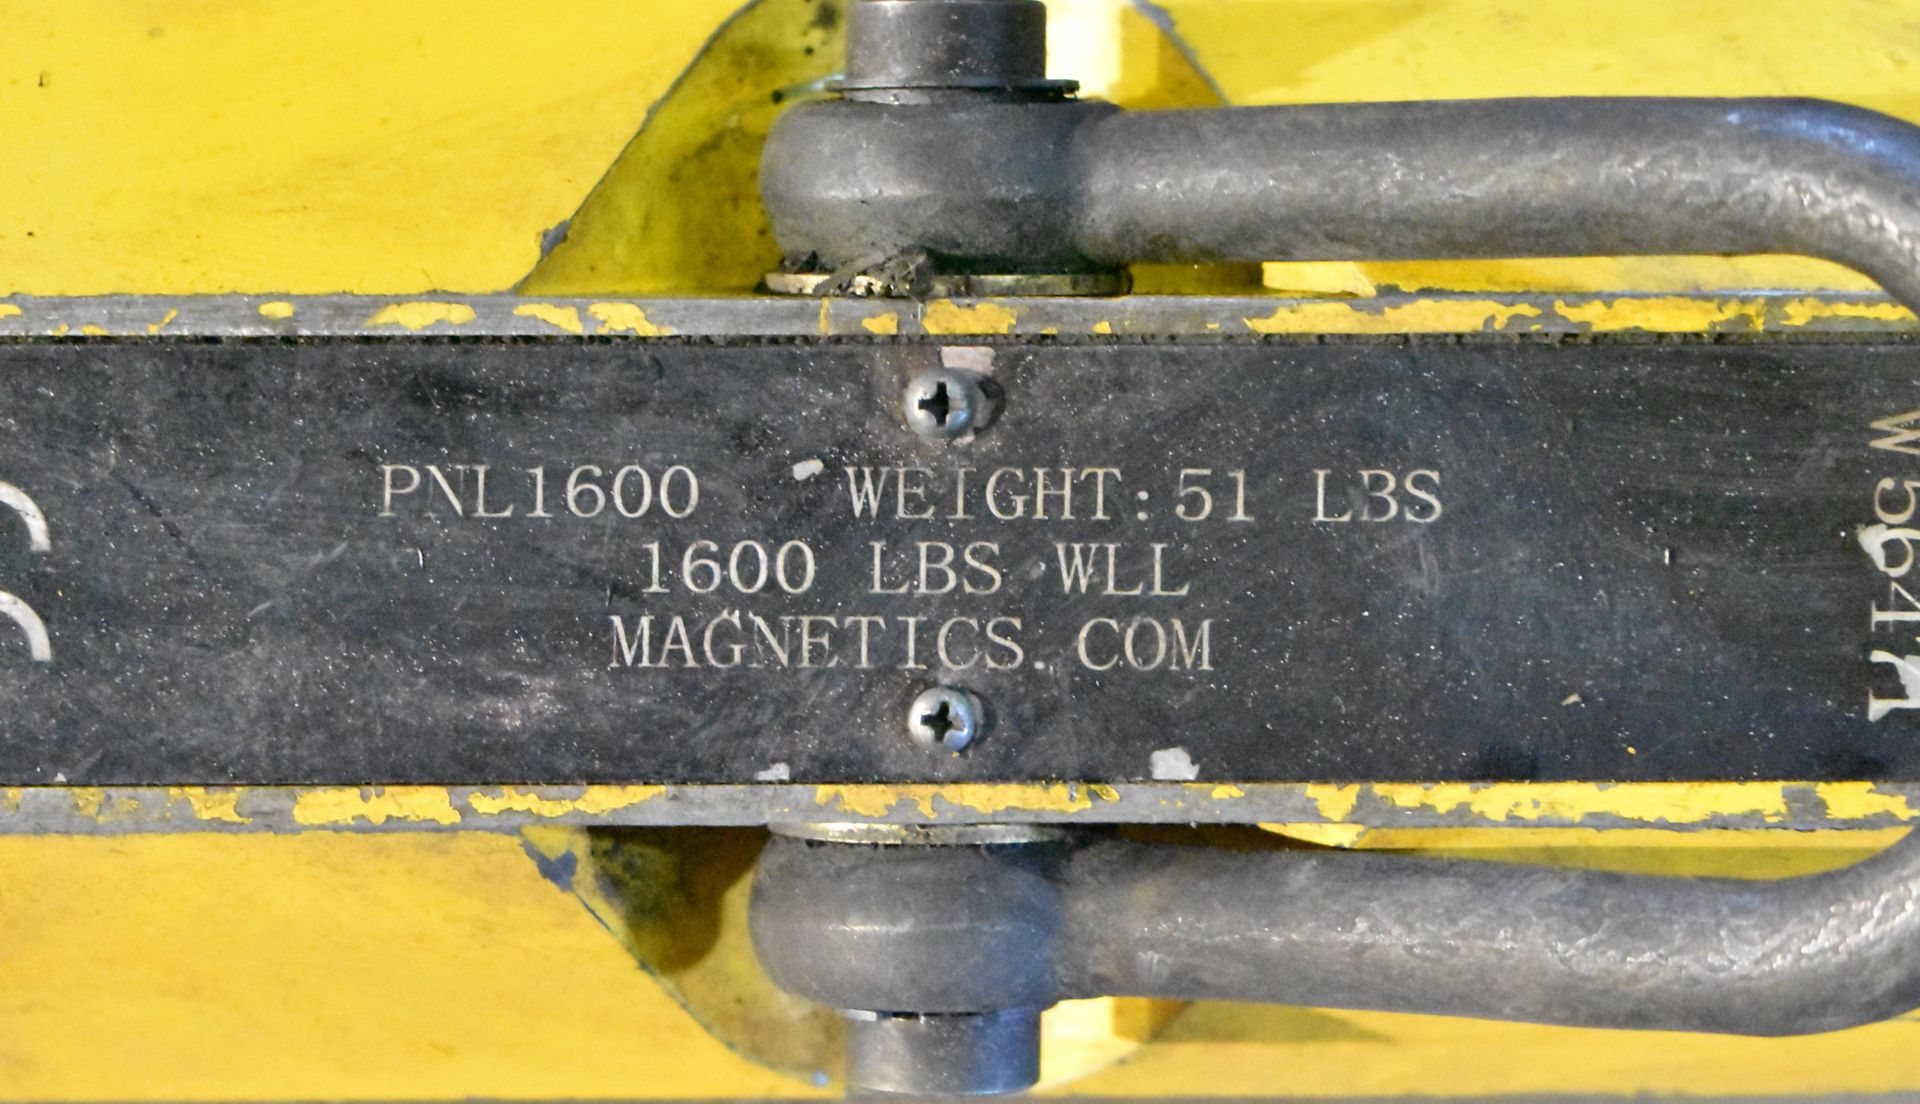 IMI MAG-MATE PNL1600 POWERLIFT MAGNET WITH 1,600 LB MAXIMUM FLAT PLATE LIFTING CAPACITY, S/N W56471 - Image 4 of 4